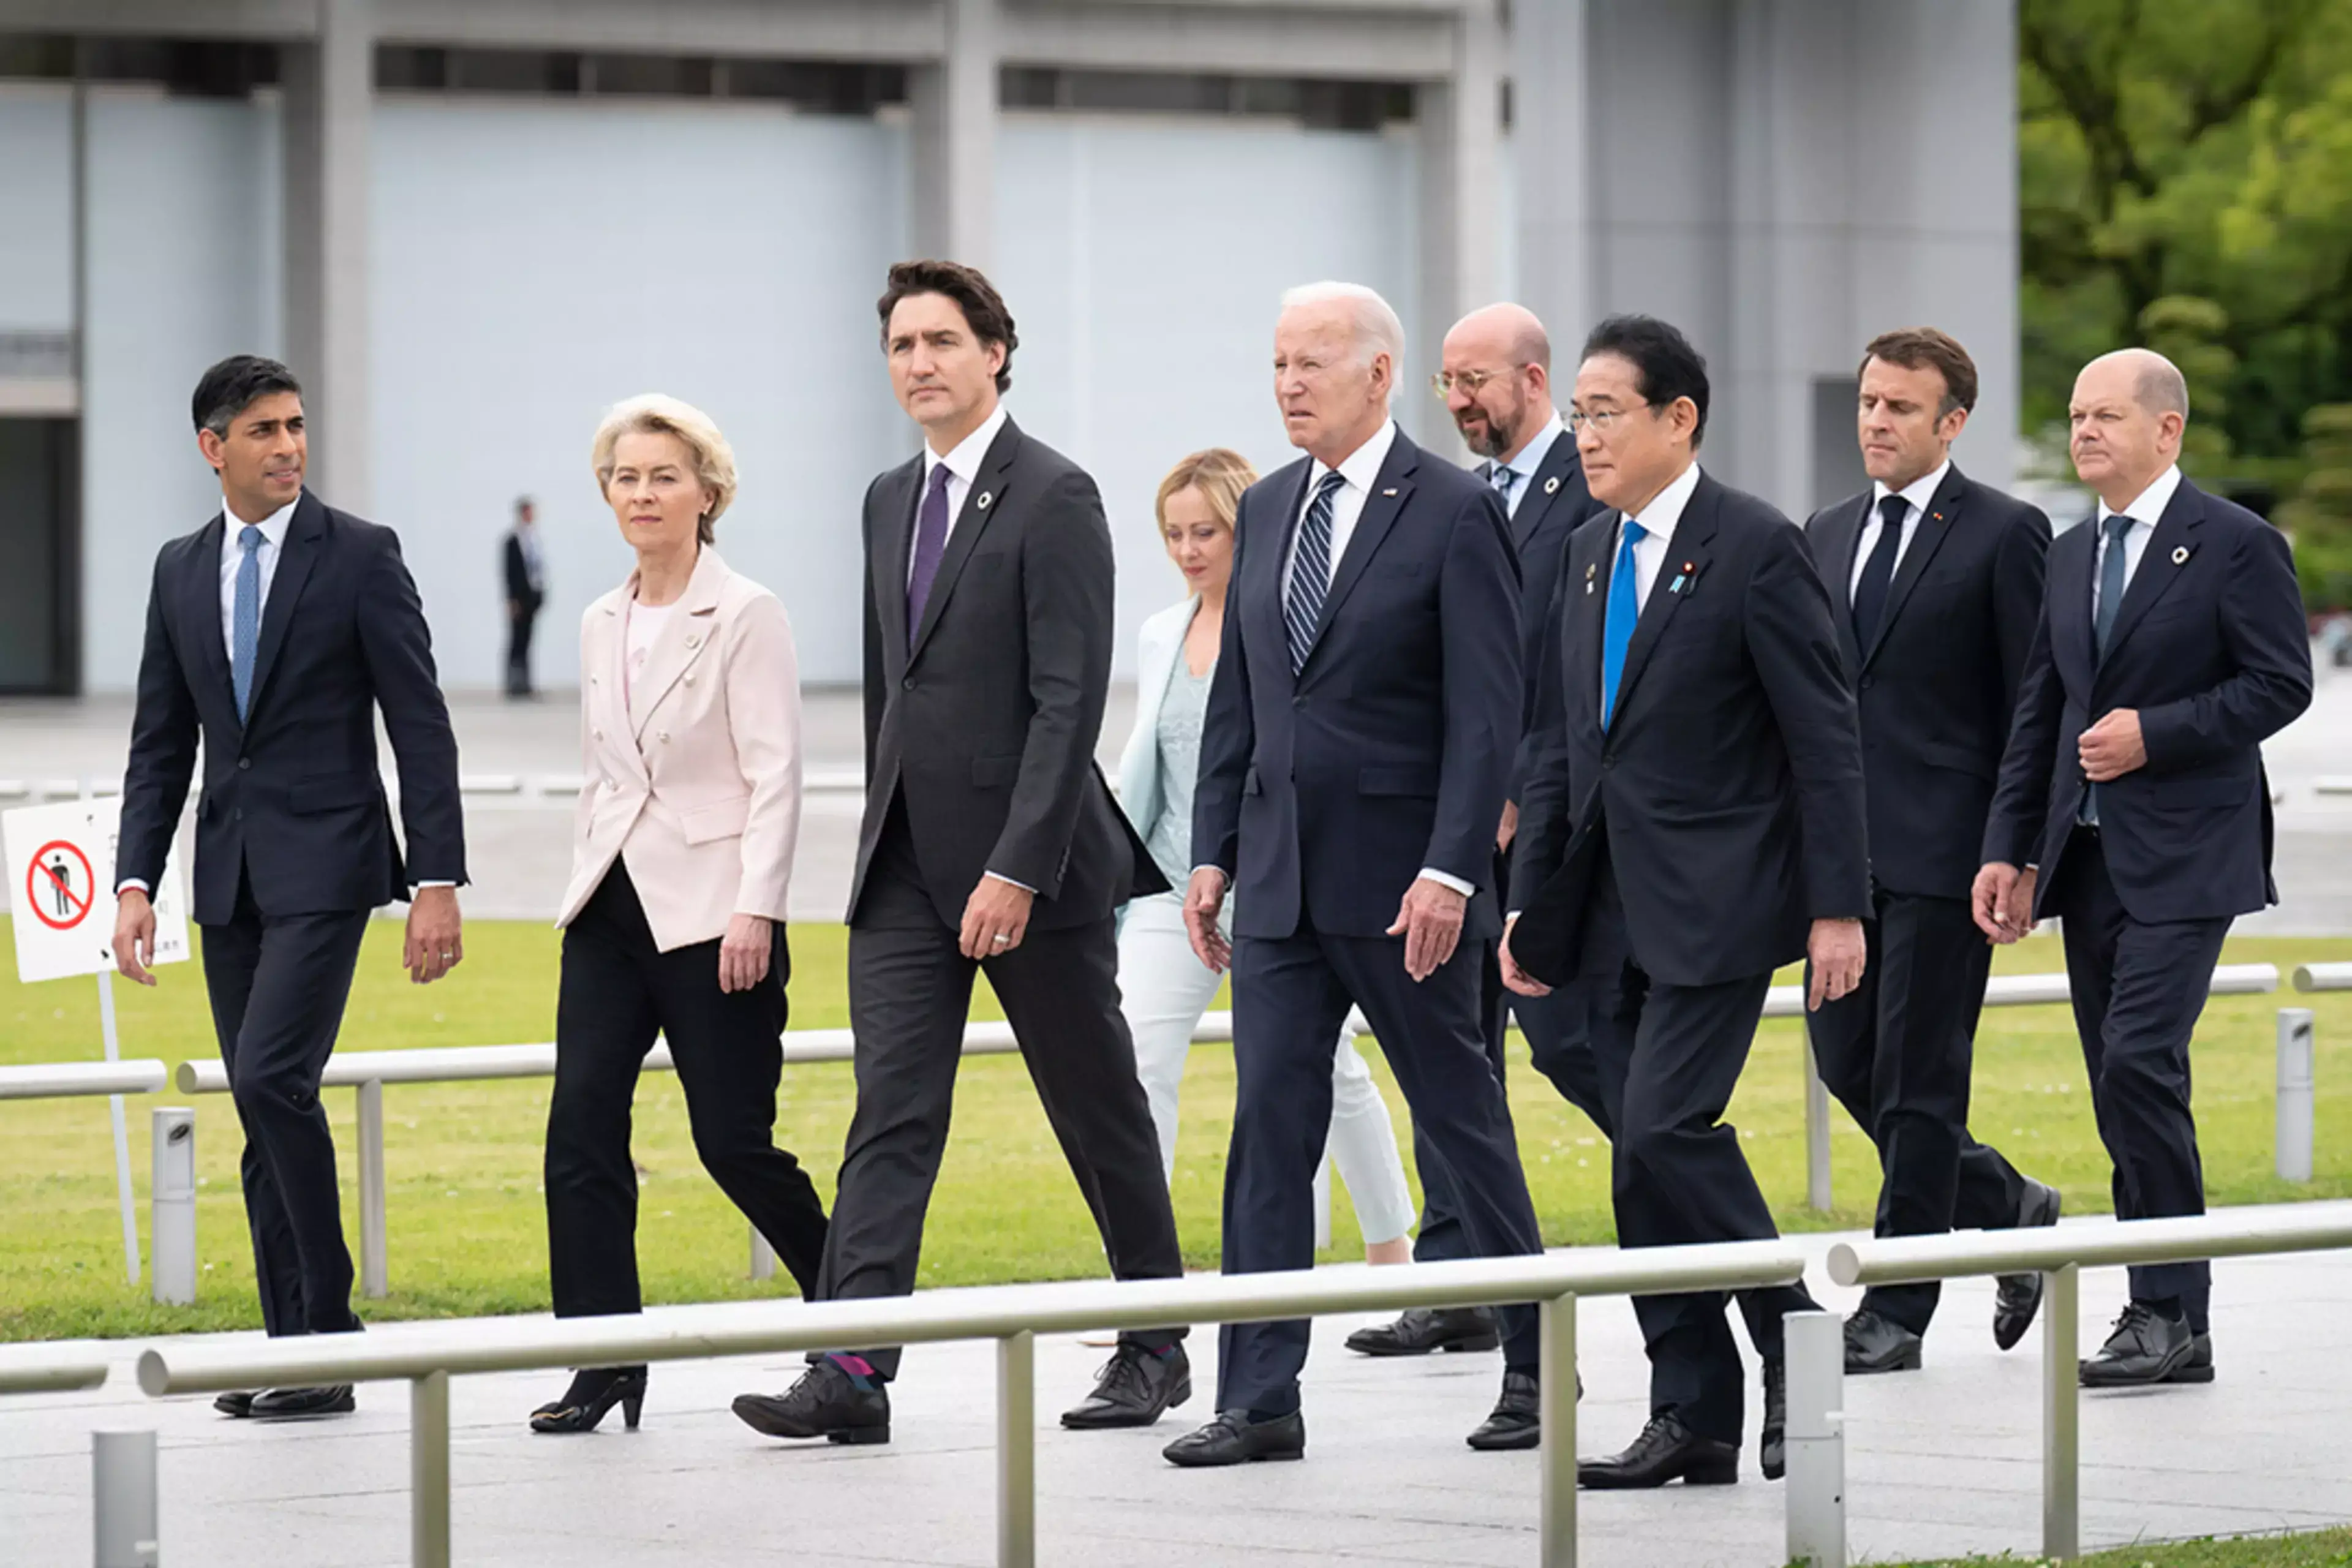 G7 leaders walk alongside one another at the 2023 summit in Hiroshima, Japan.